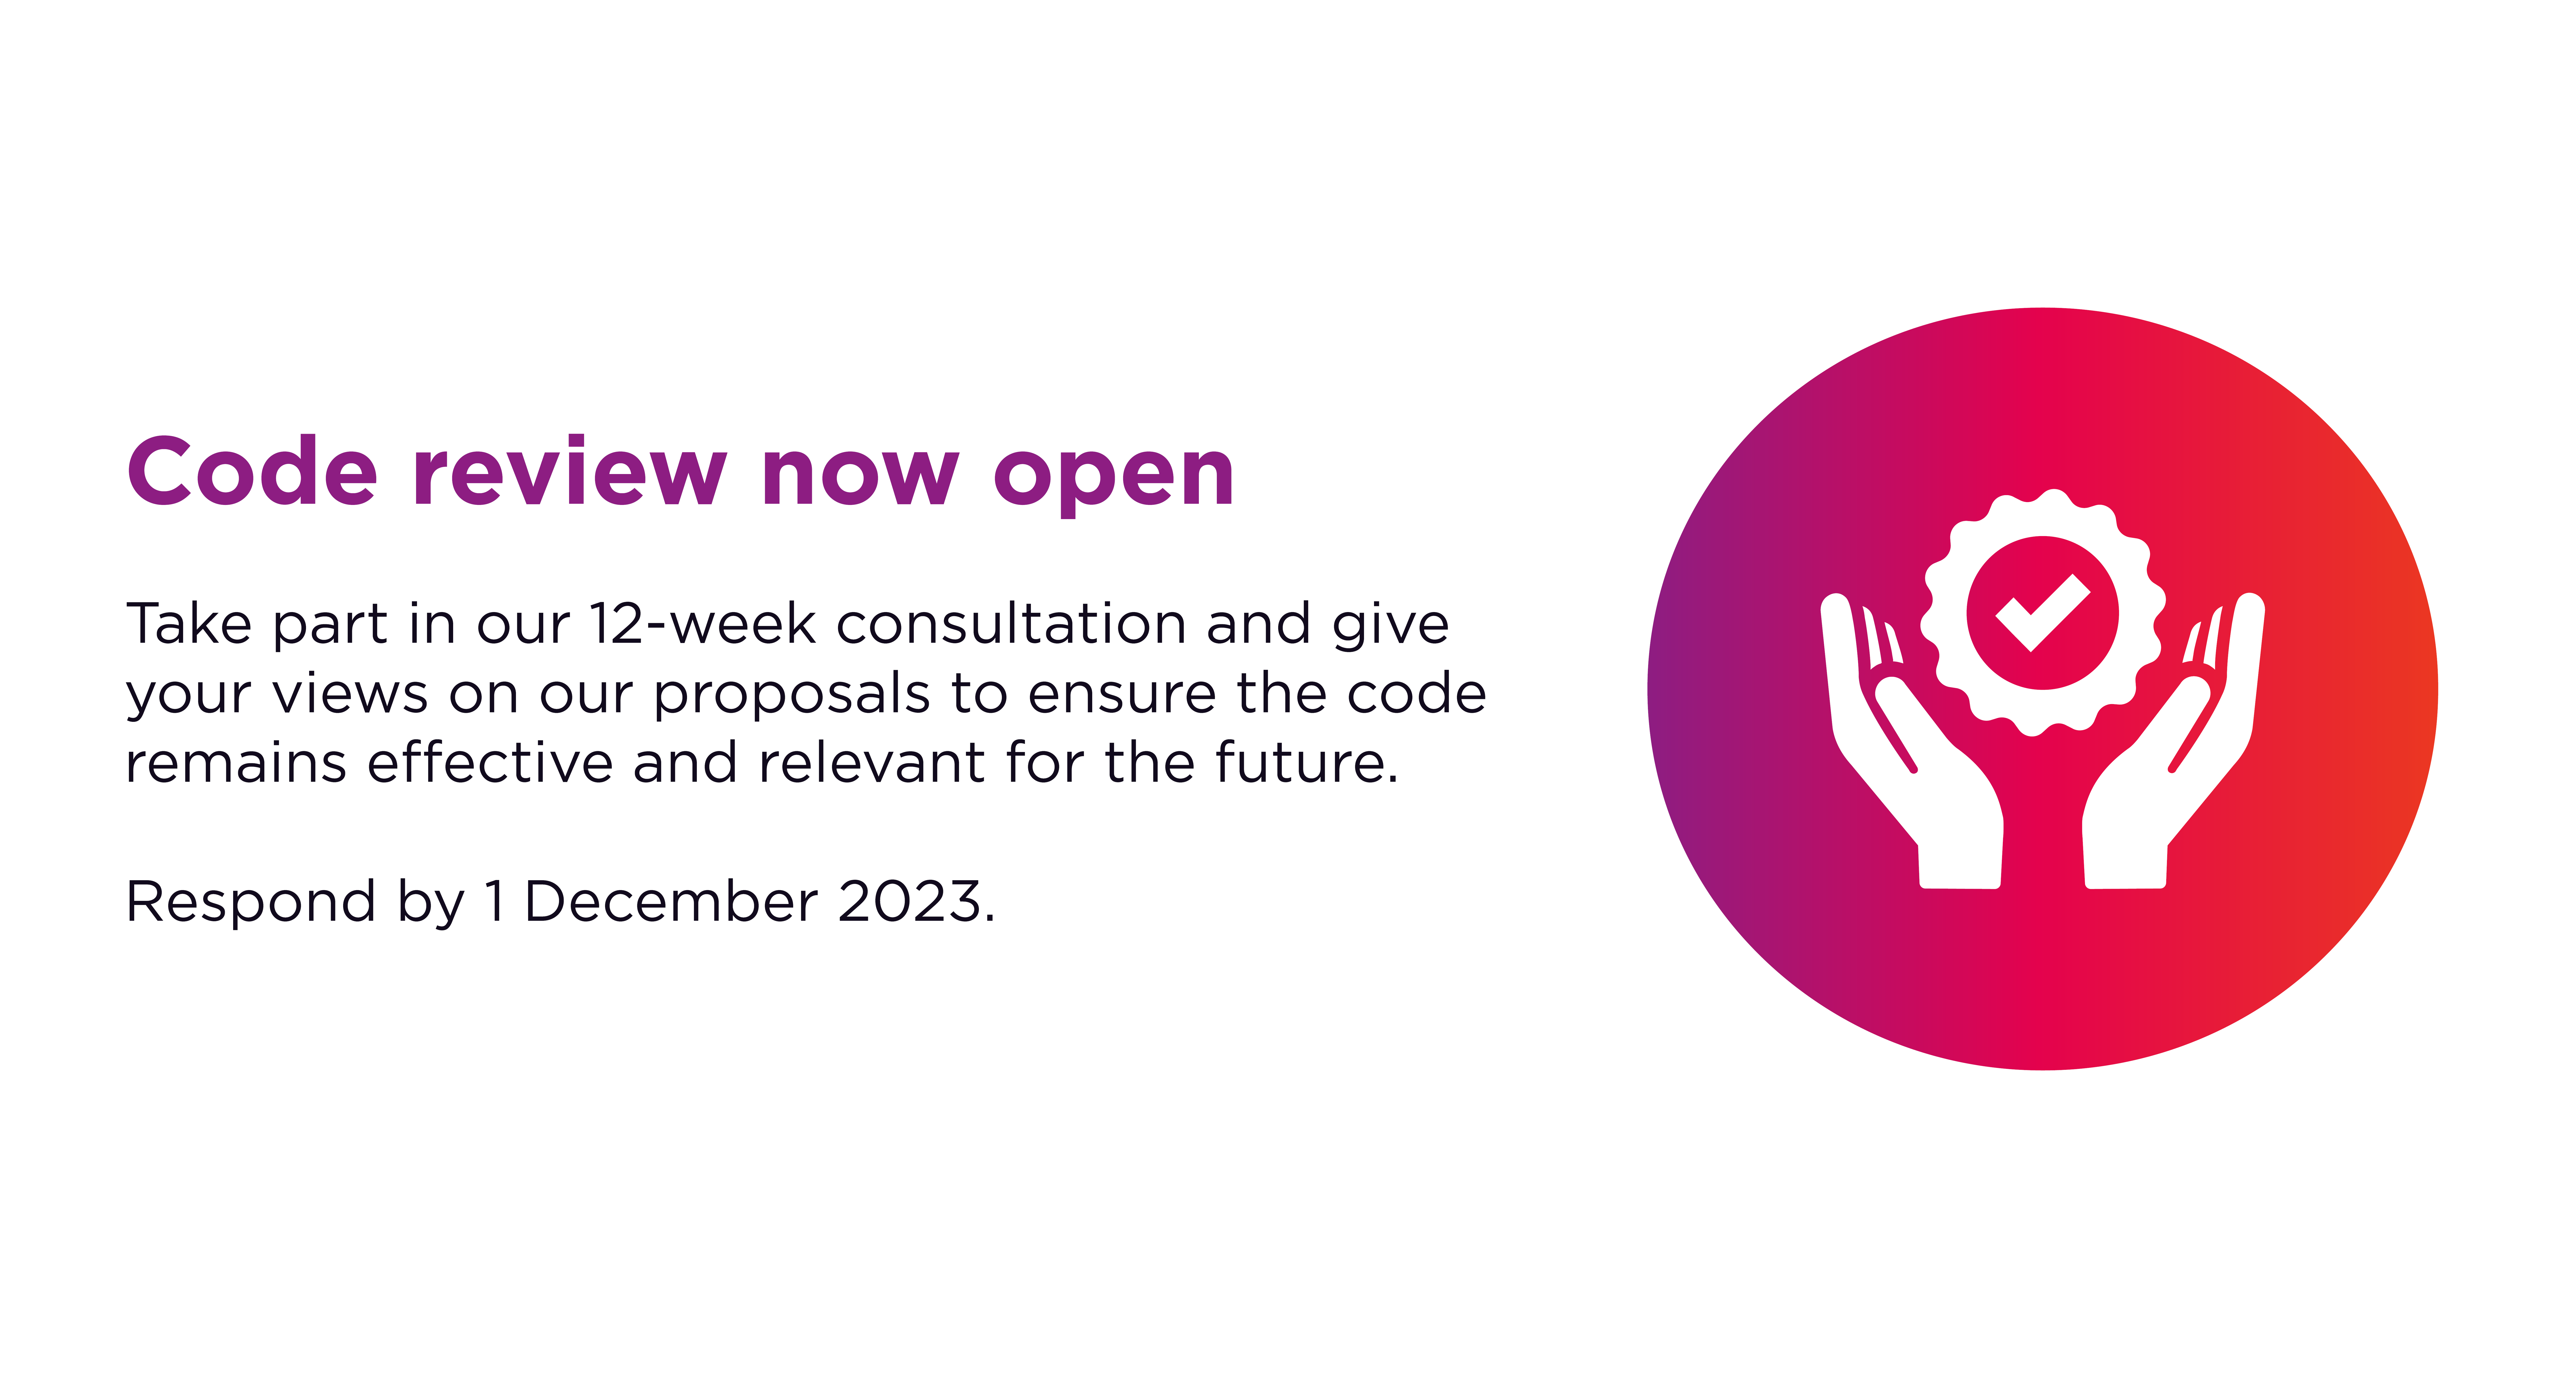 The code consultation is now open